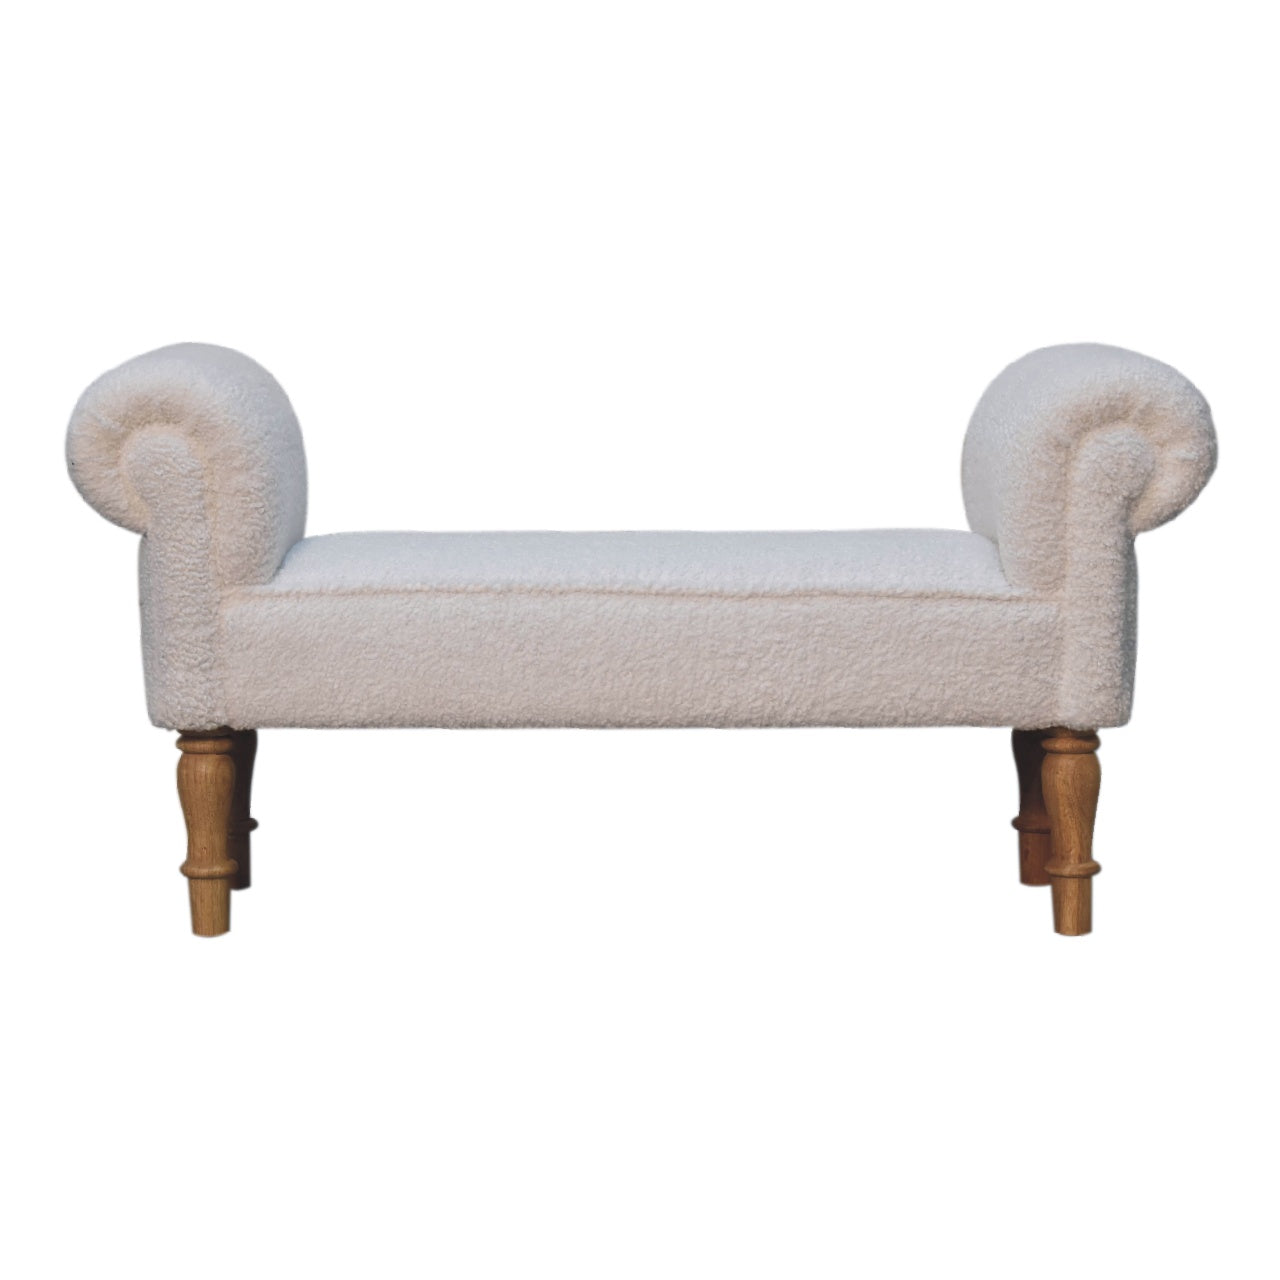 View White Boucle Bedroom Bench information